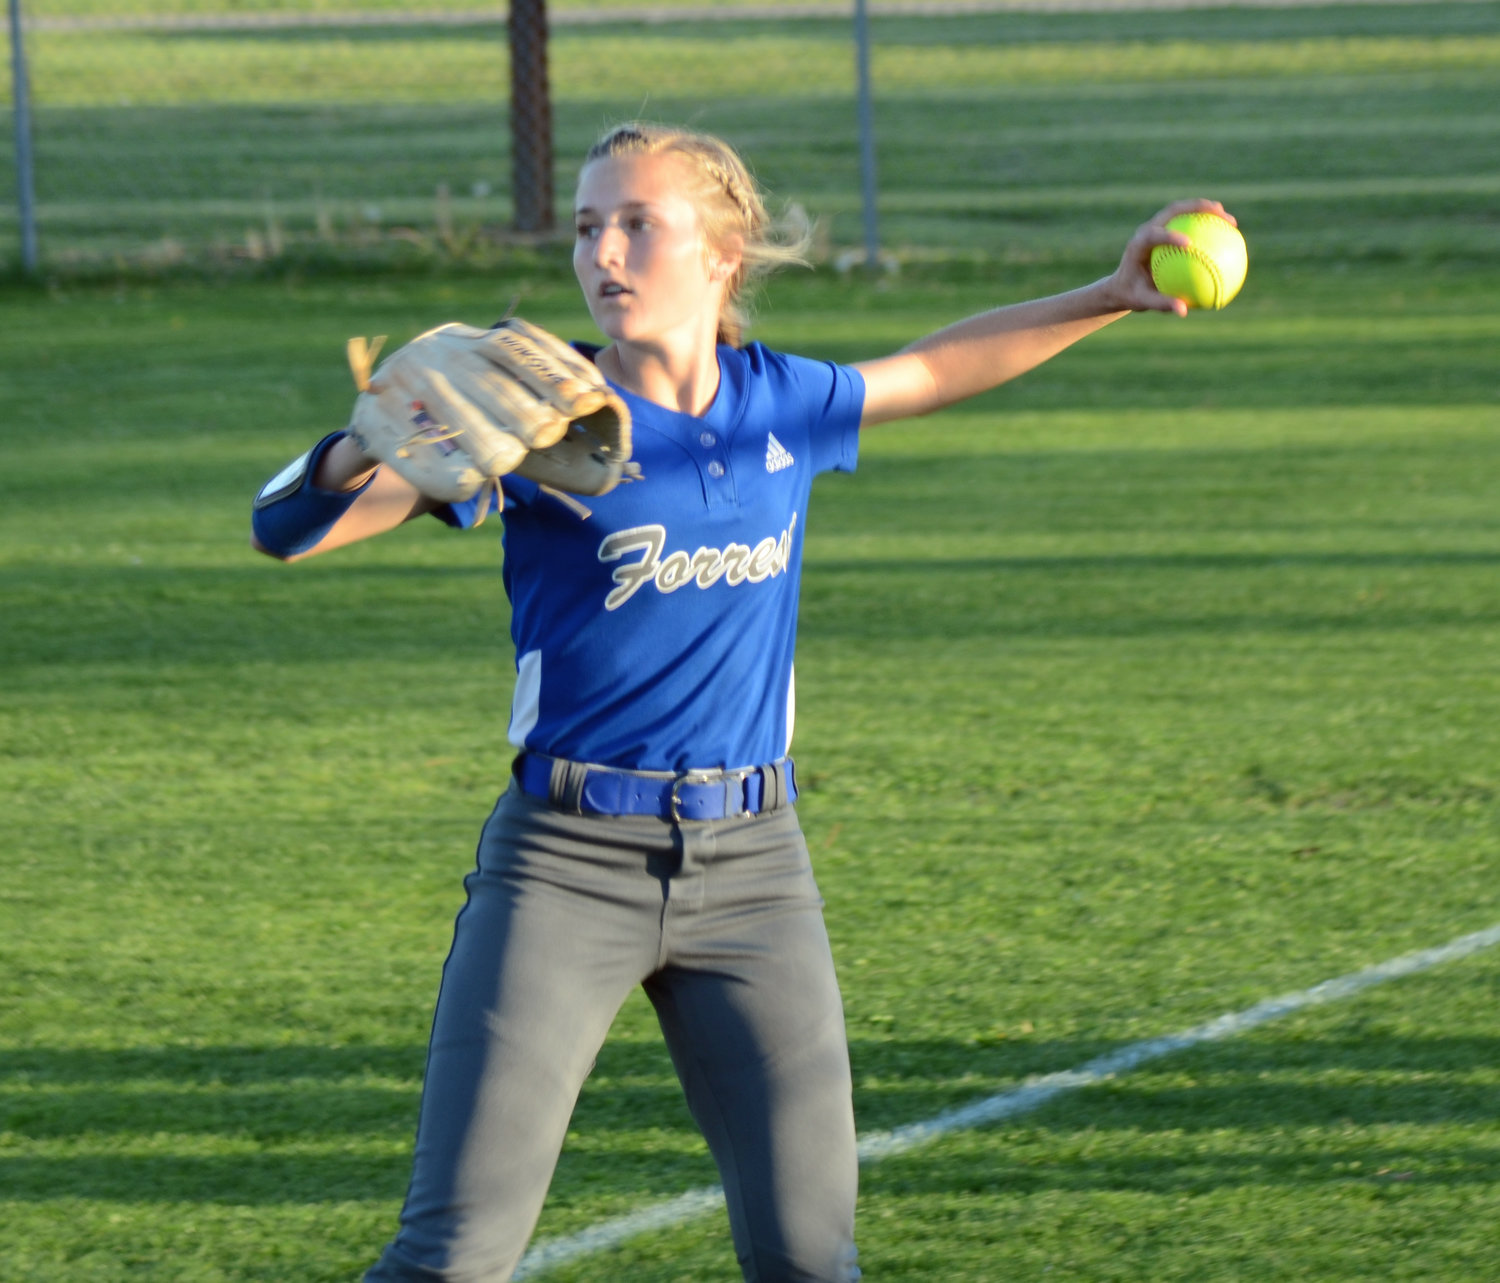 Maggie Daughrity had a huge night on defense in right field for the Lady Rockets.